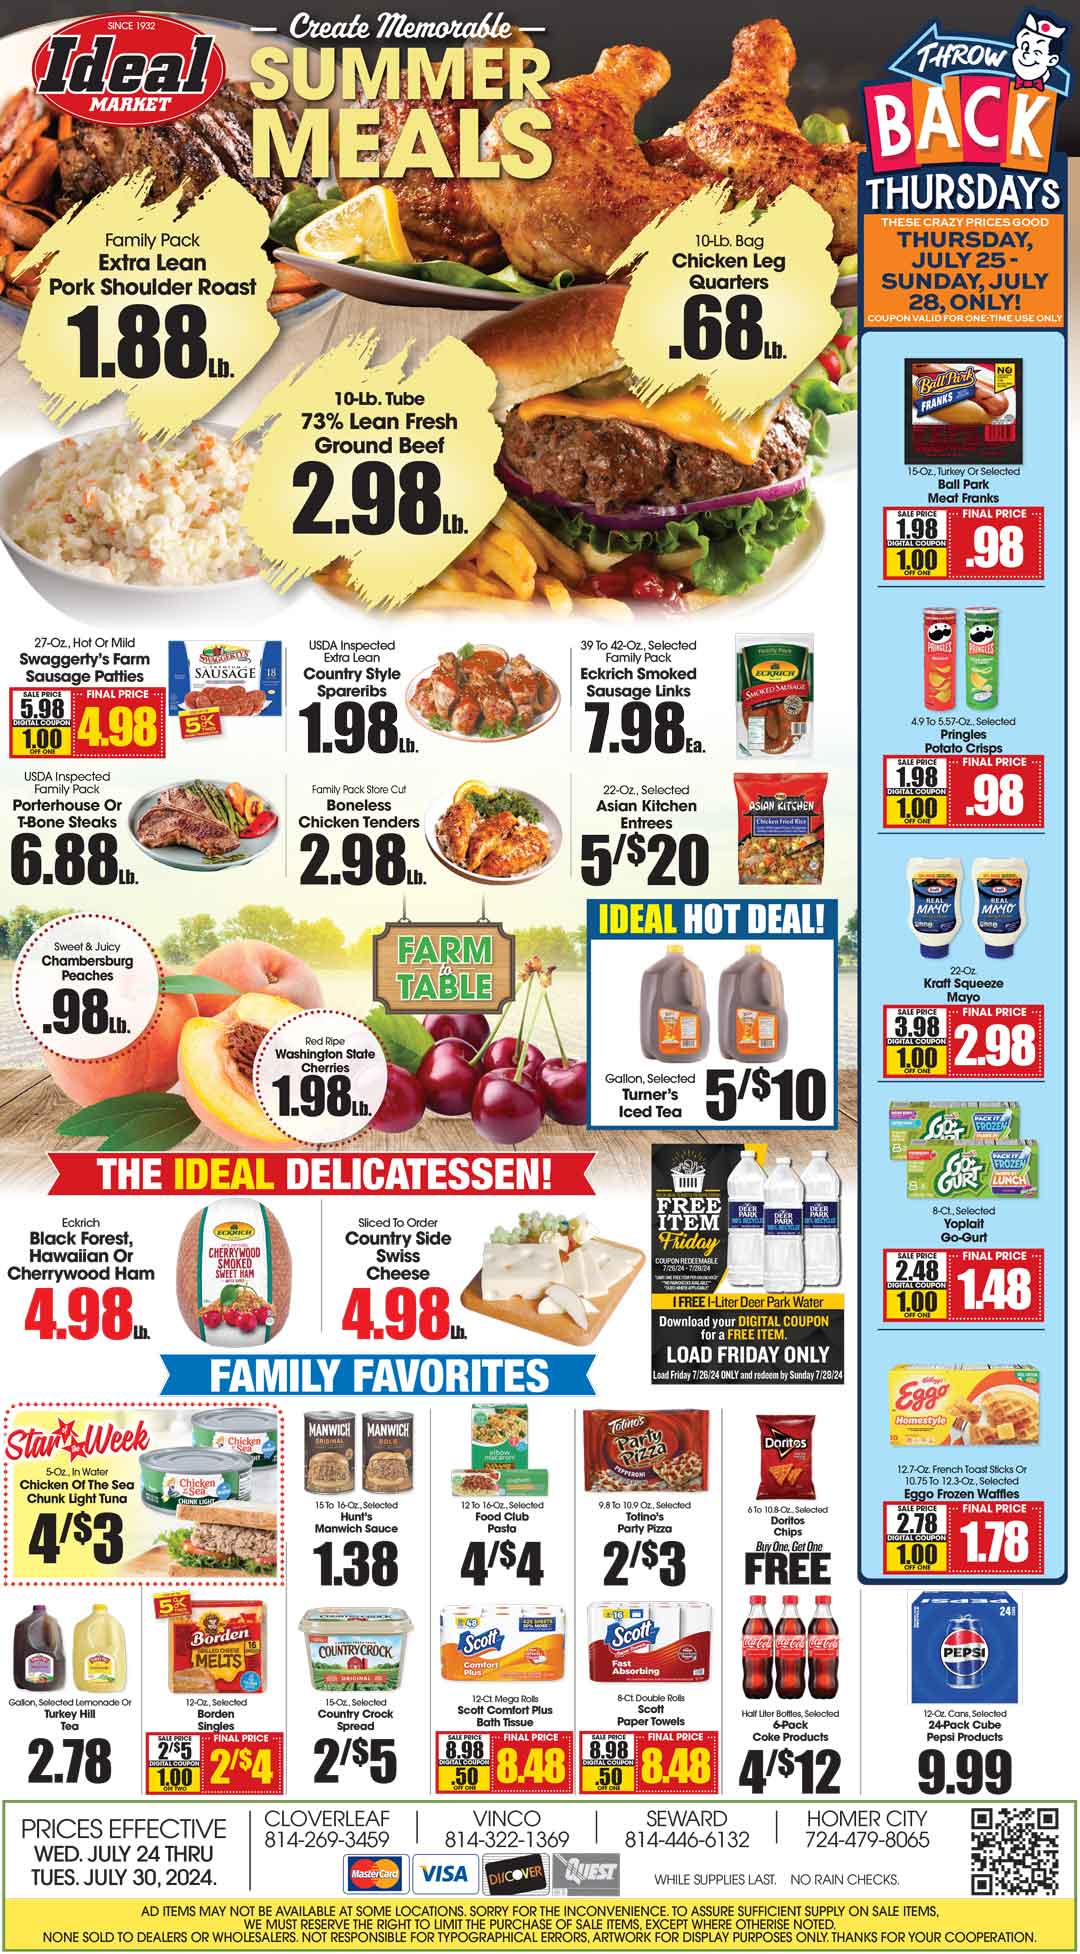 Ideal Market Specials July 24-30, 2024 Page 1 of 4